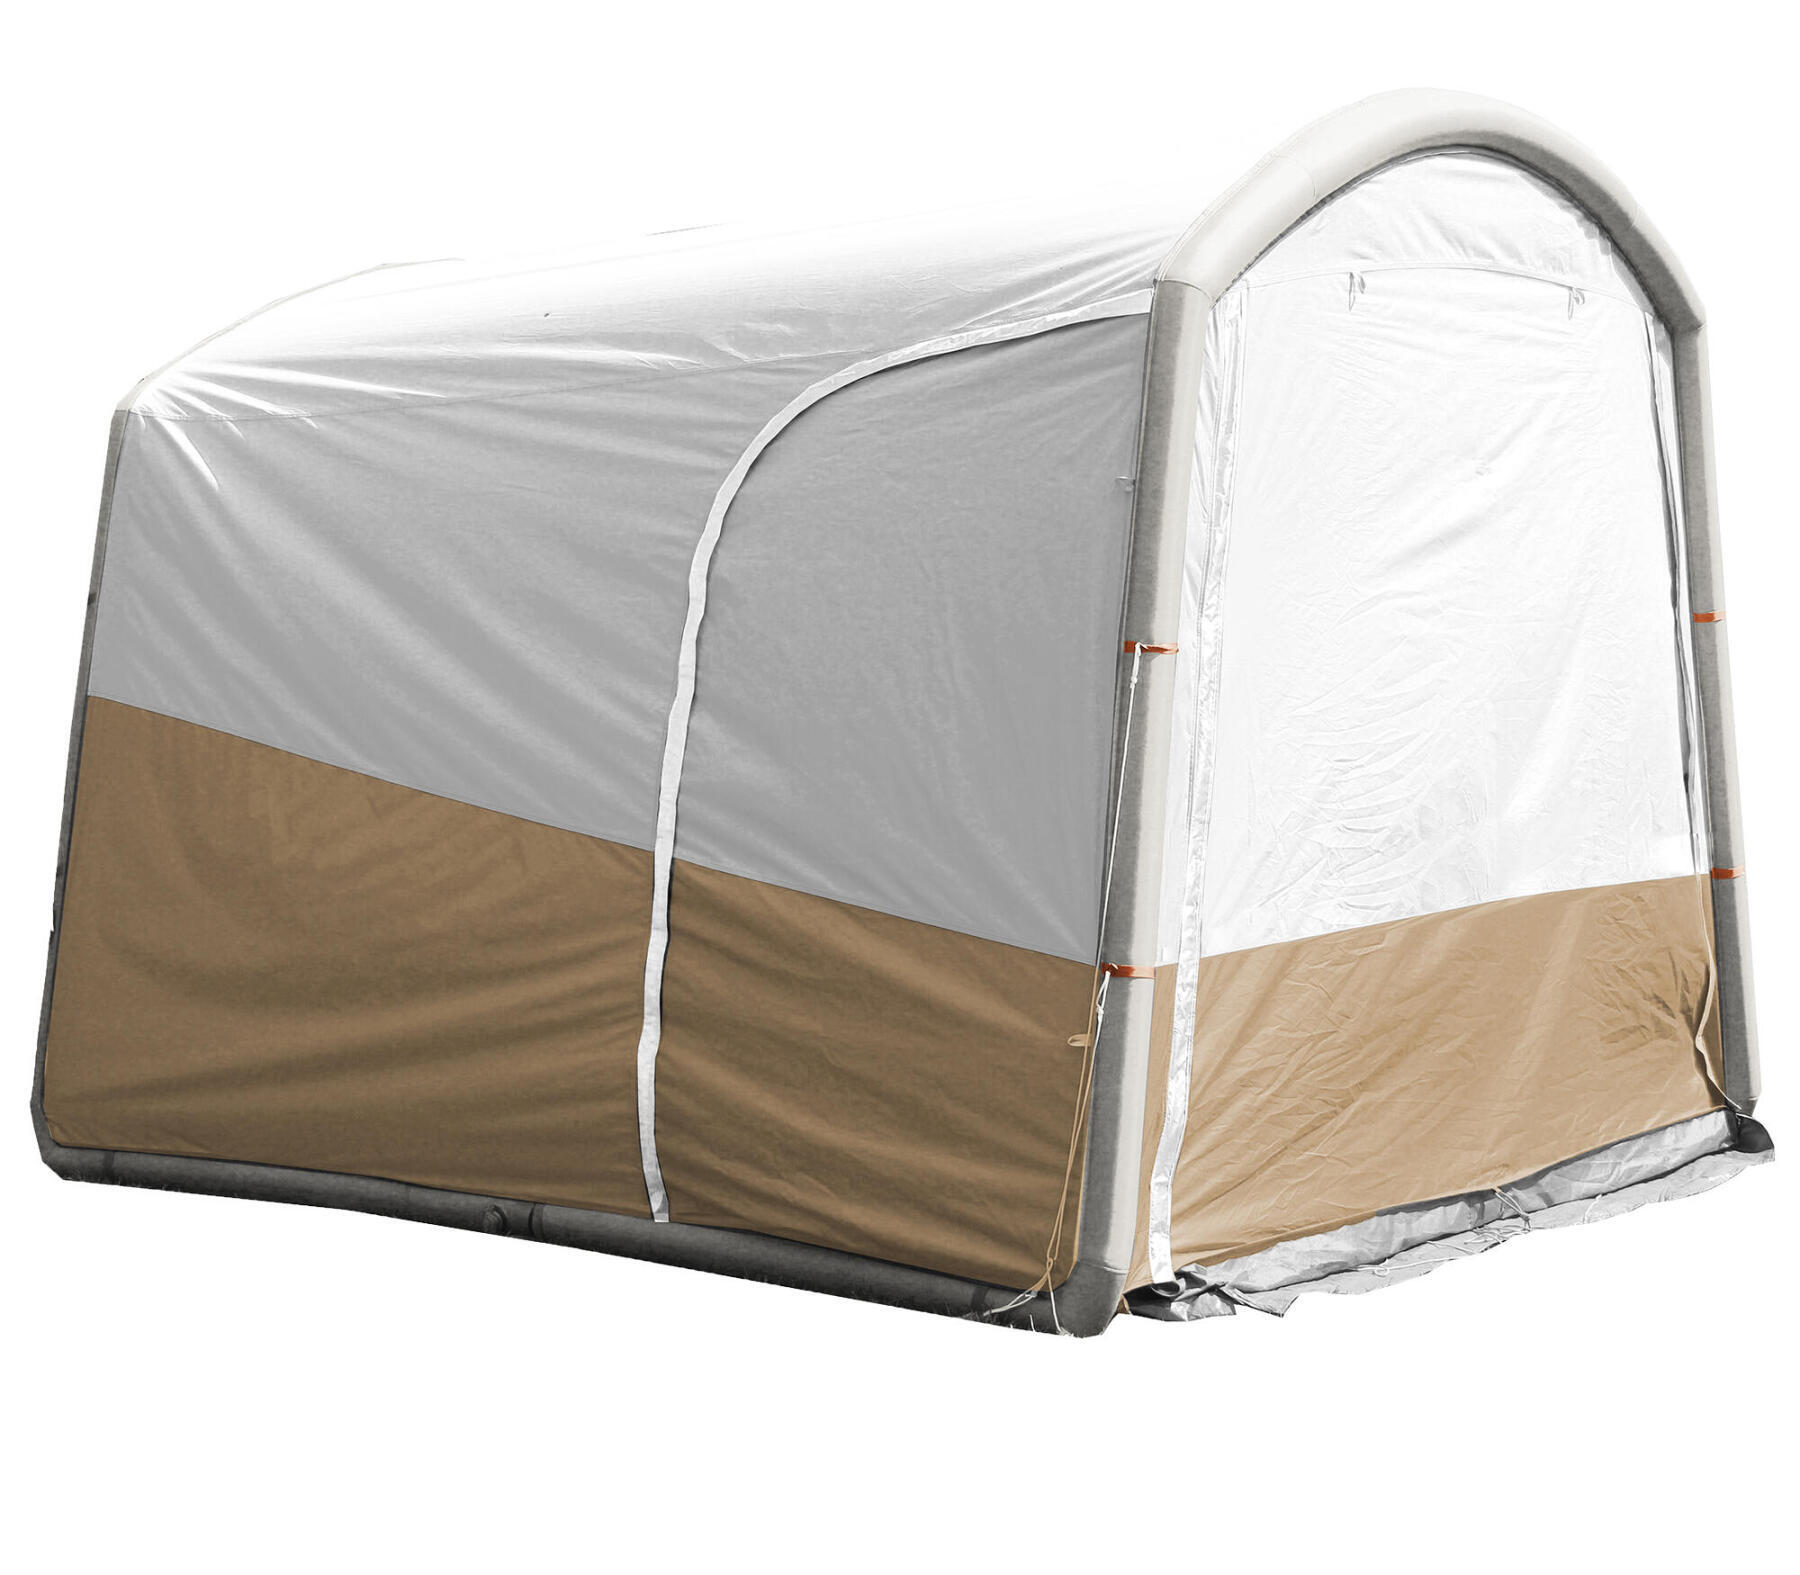 AVANCE CAMPING QUECHUA AIR SECONDS BASE CONNECT FRESH | 6 PERSONAS (2020)